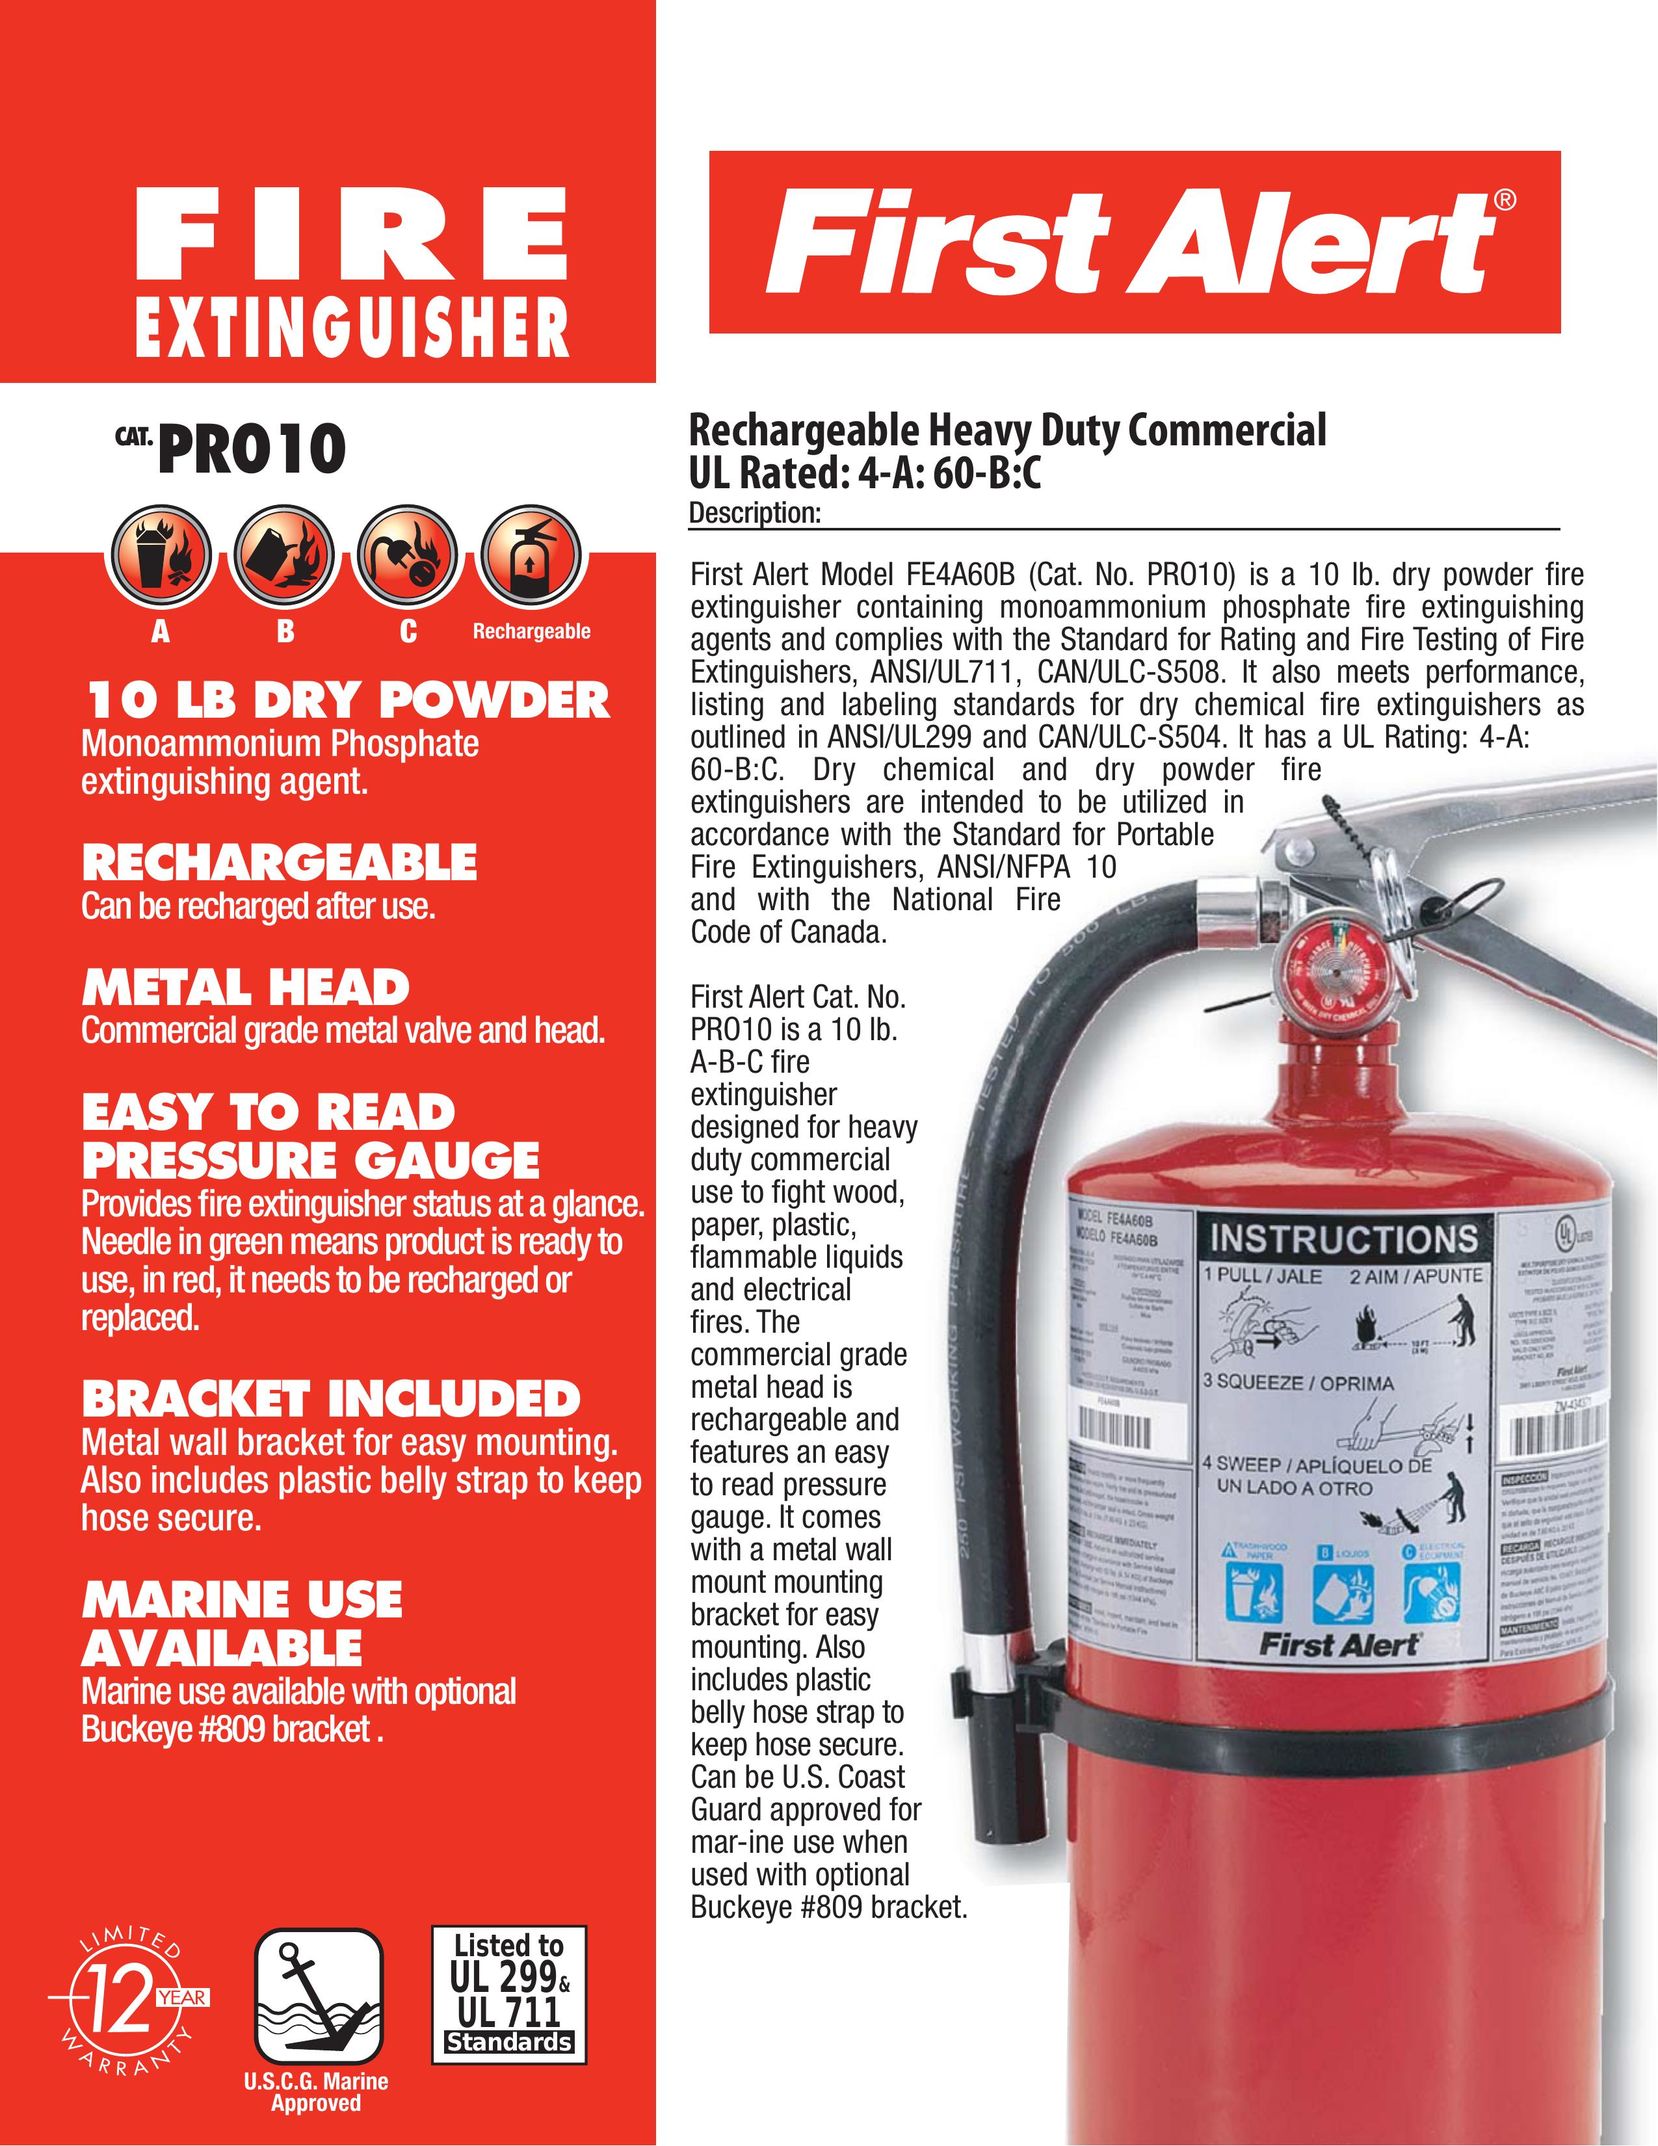 First Alert PRO10 Fire Extinguisher User Manual